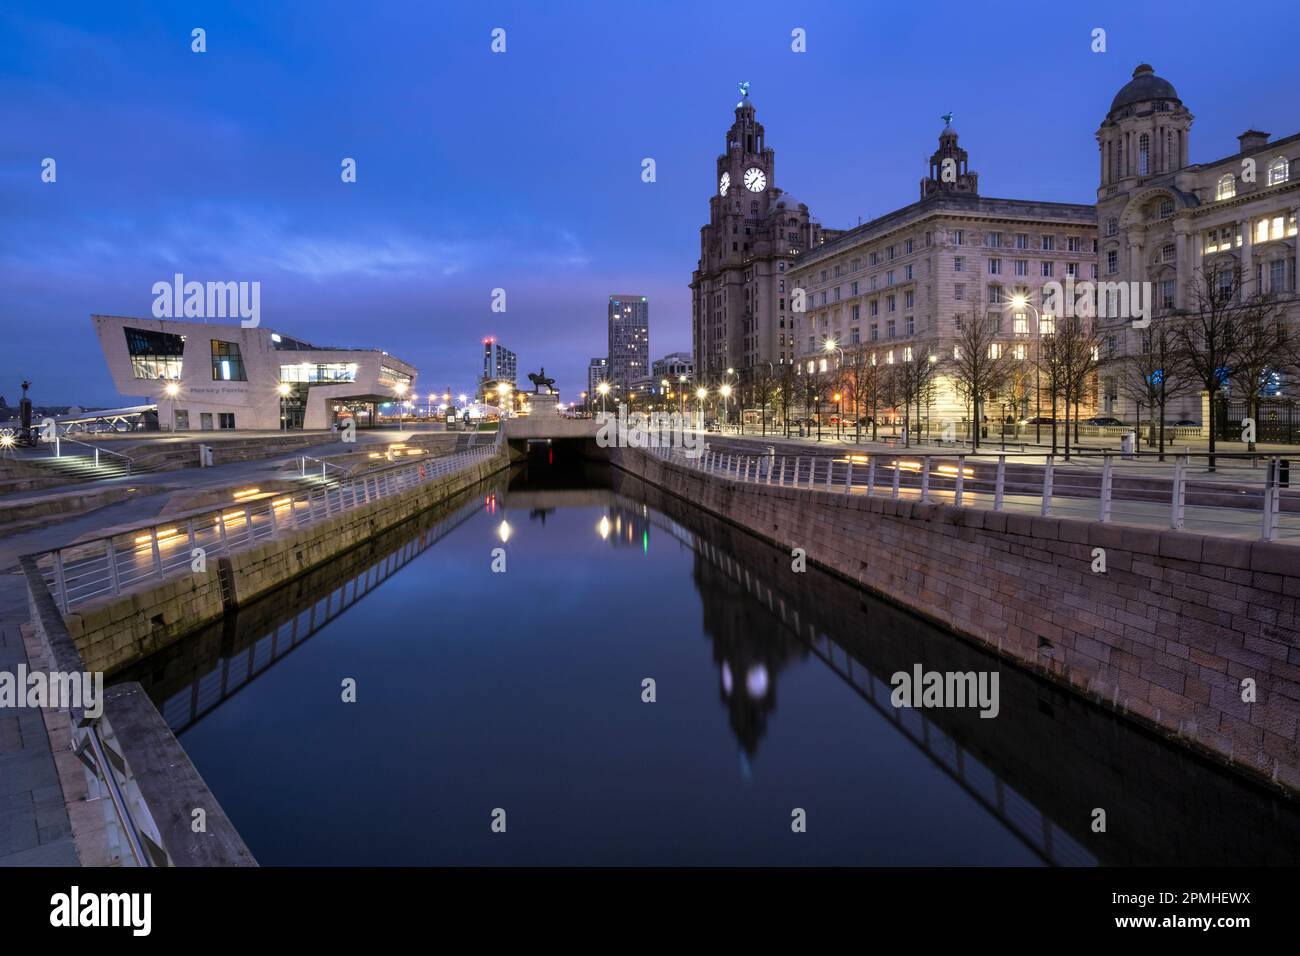 The Pier Head at dawn, Liverpool Waterfront, Liverpool, Merseyside, England, United Kingdom, Europe Stock Photo